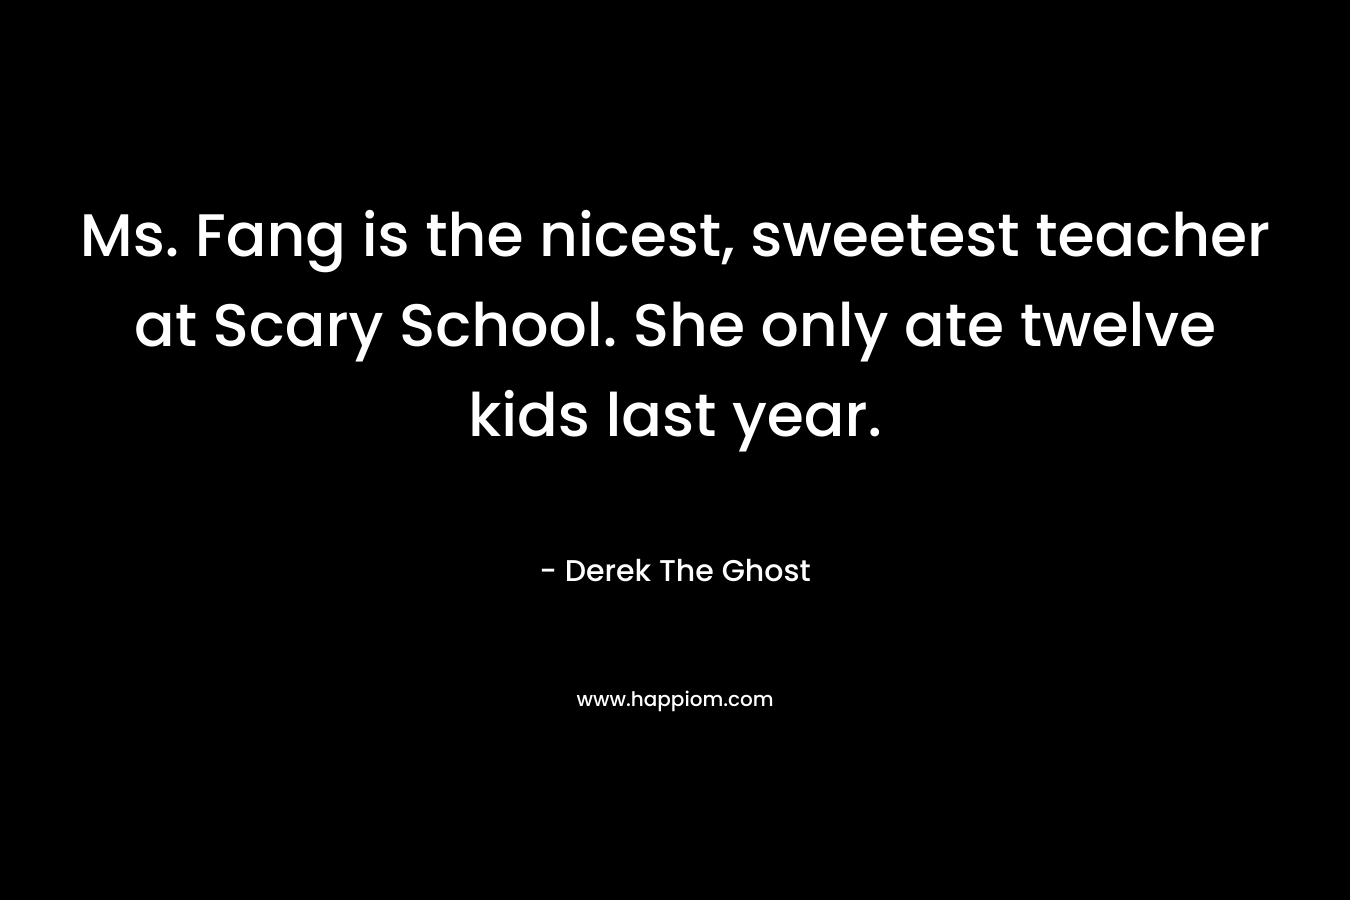 Ms. Fang is the nicest, sweetest teacher at Scary School. She only ate twelve kids last year.